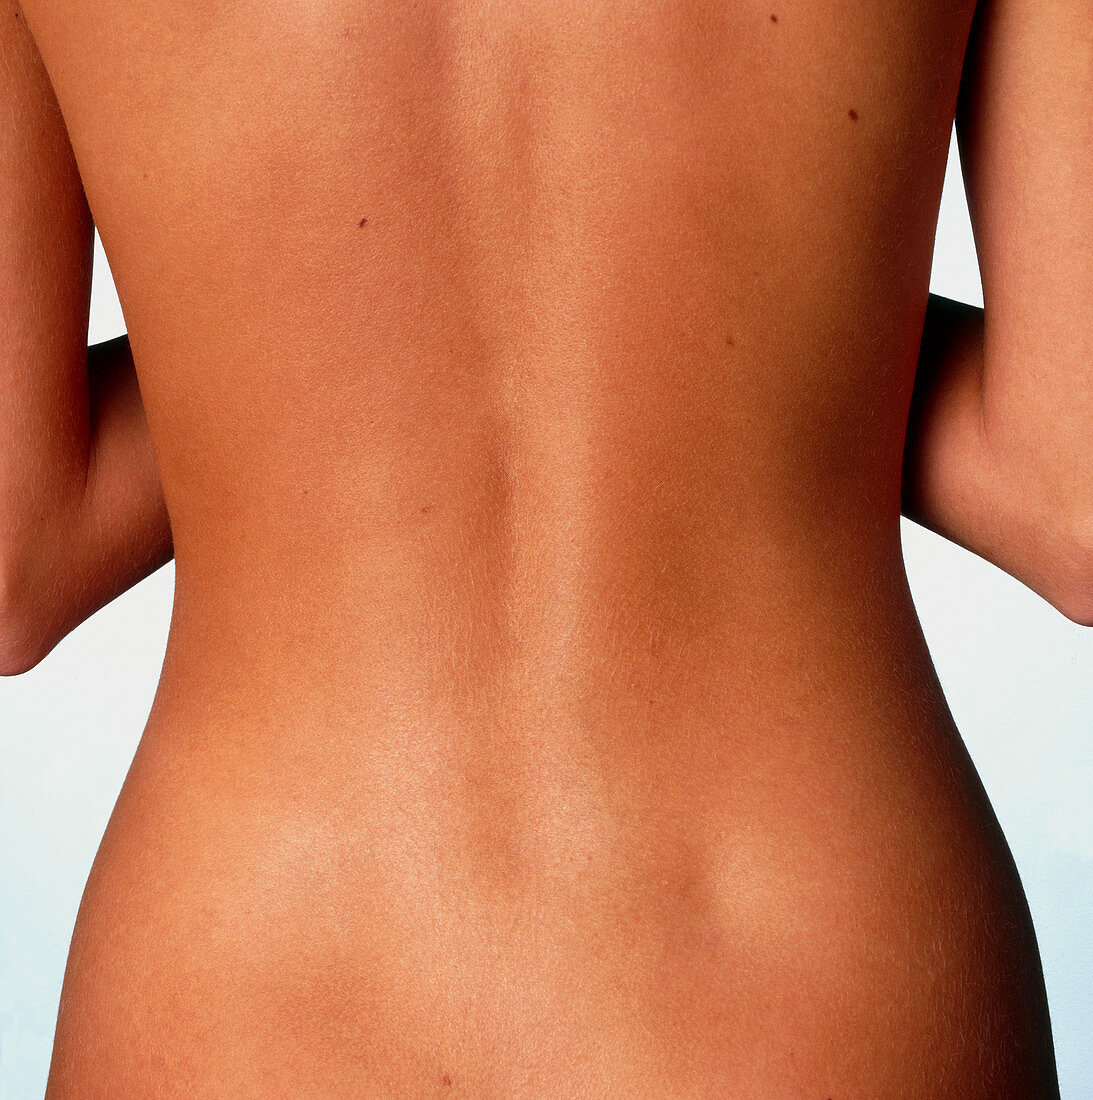 Woman's back: posterior view of the torso